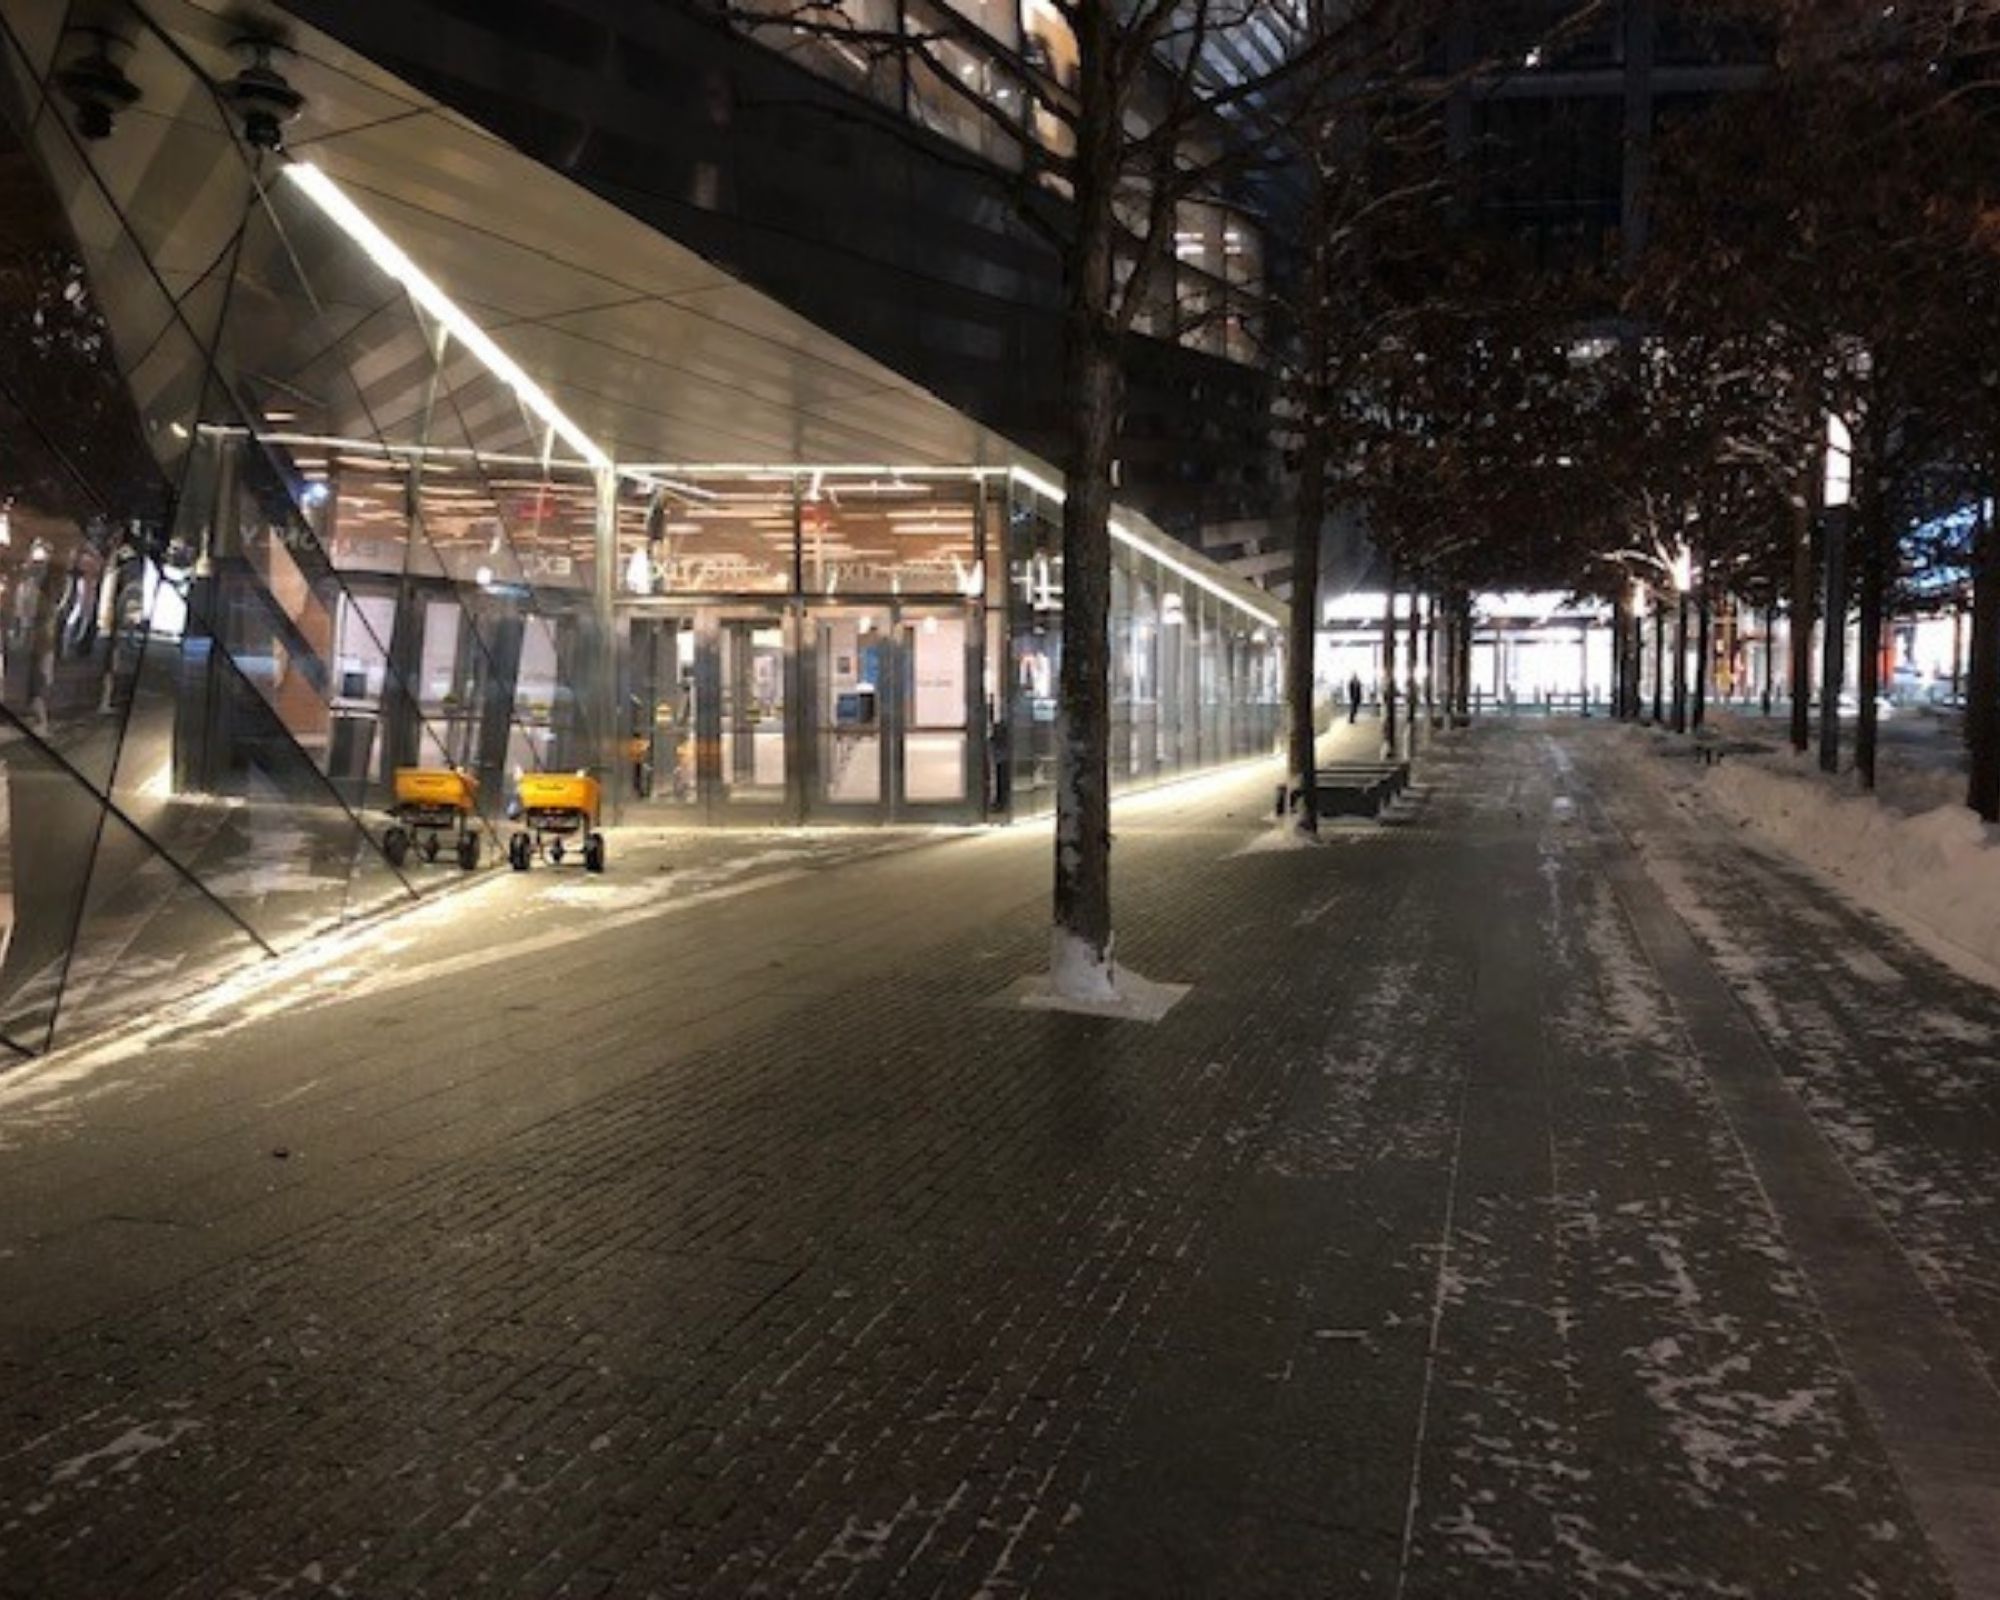 Nighttime on the Museum exterior, with path cleared of snow